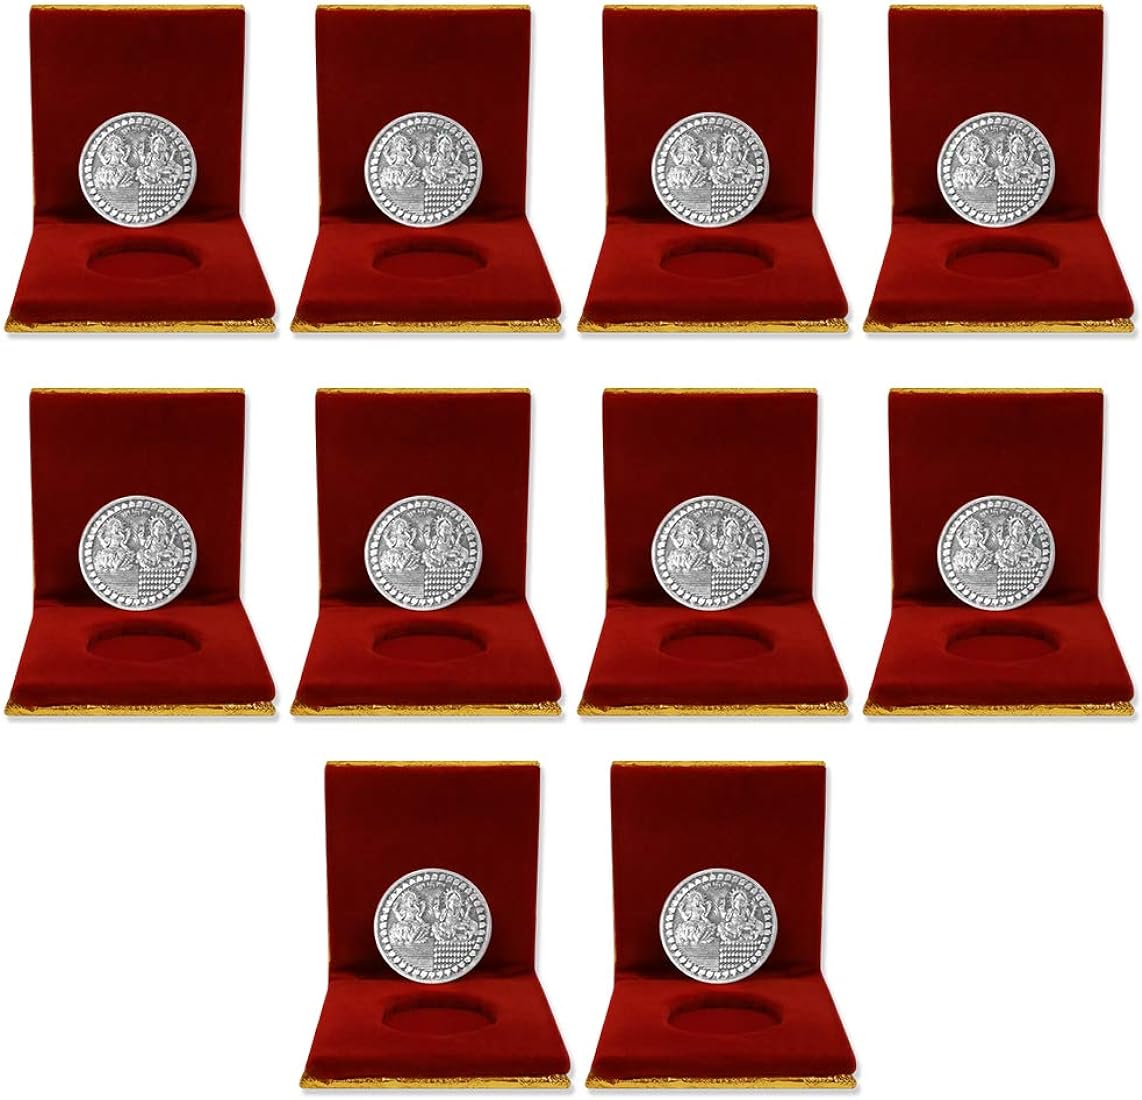 Diwali Silver Coins & Bars | Personalized Silver Coins | Innovative Diwali Gifts